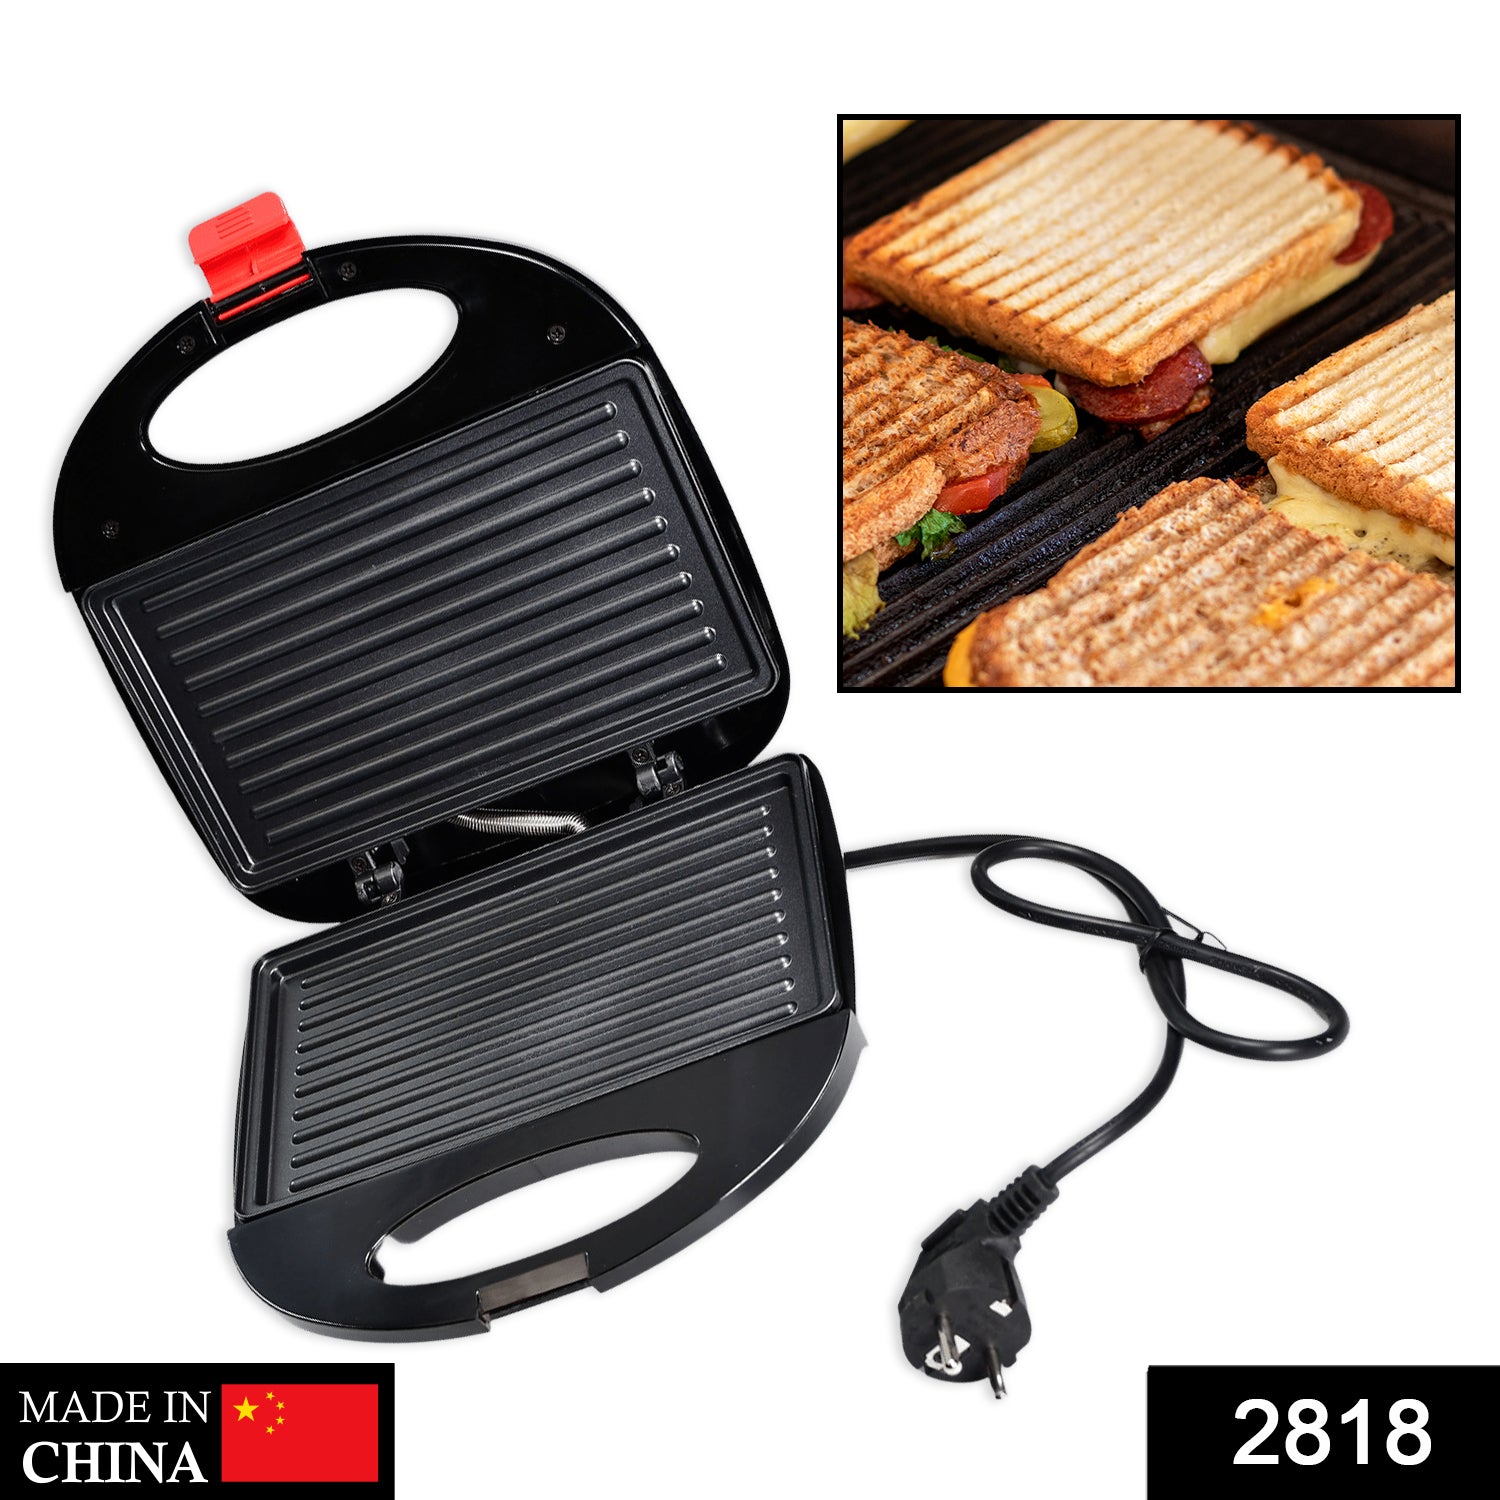 2818 Sandwich Maker Makes Sandwich Non-Stick Plates| Easy to Use with Indicator Lights DeoDap